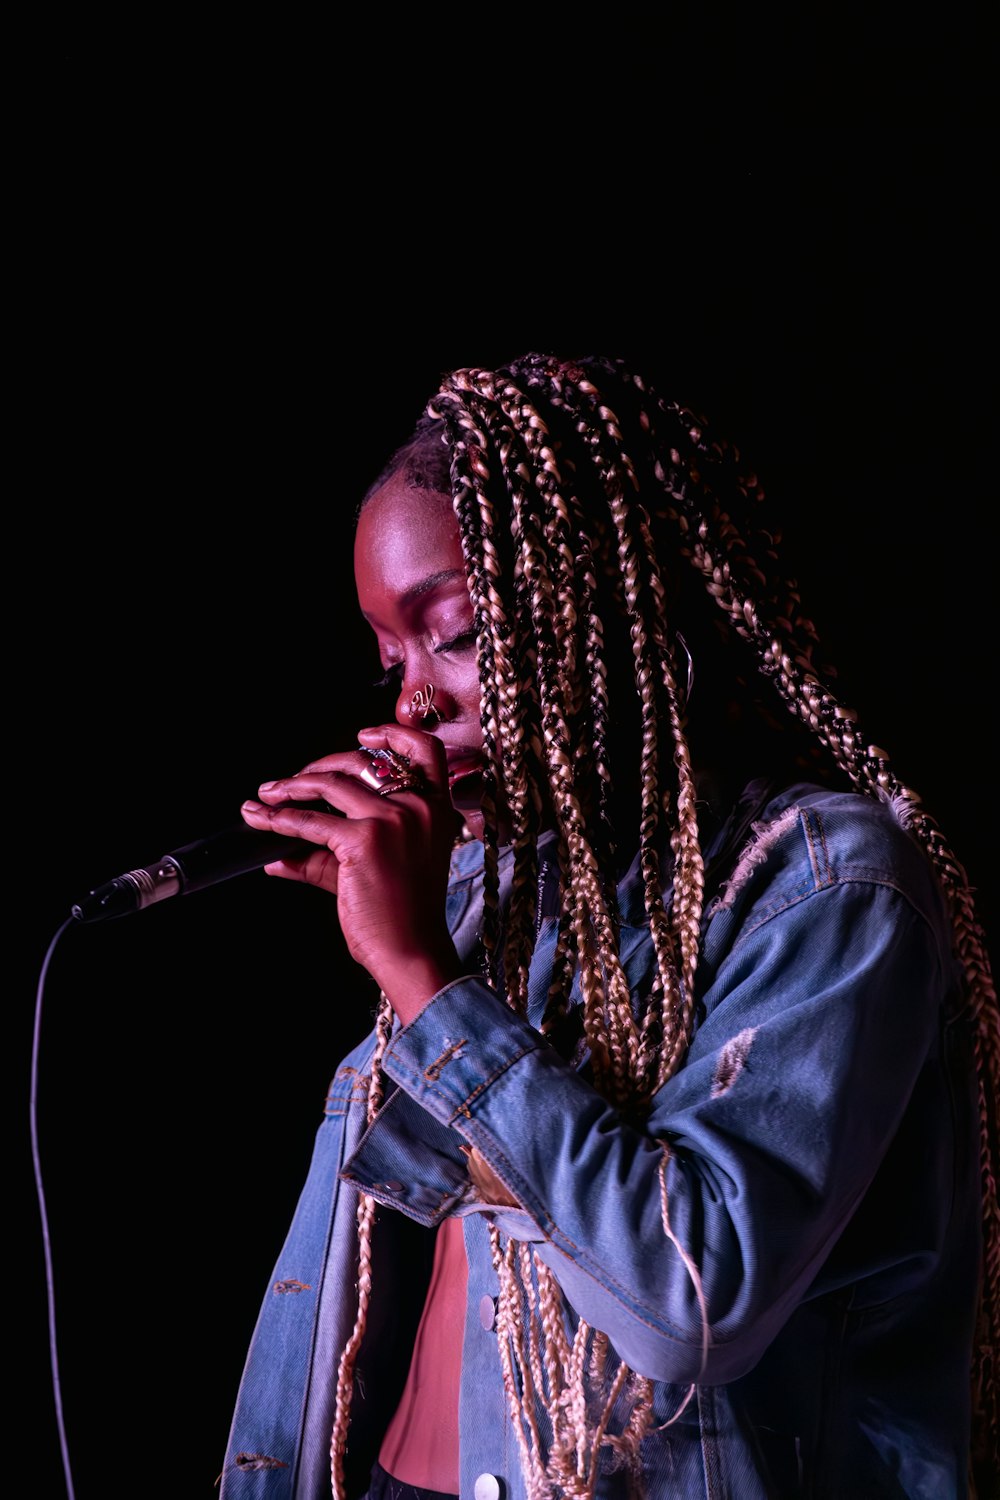 a woman with dreadlocks singing into a microphone